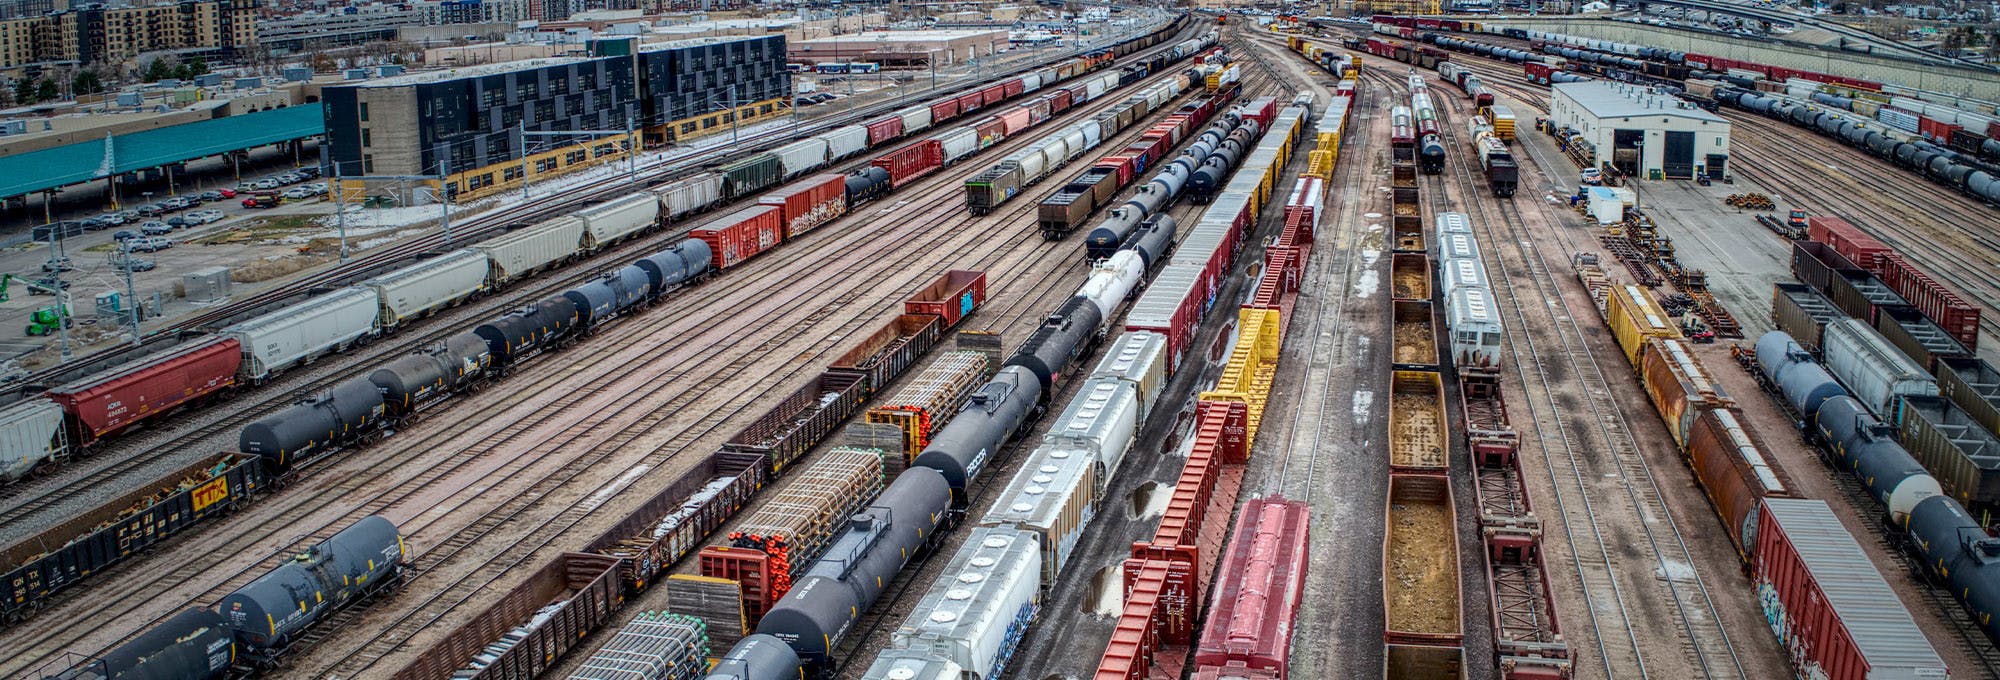 Multiple train tracks storing crates and containers of products and goods